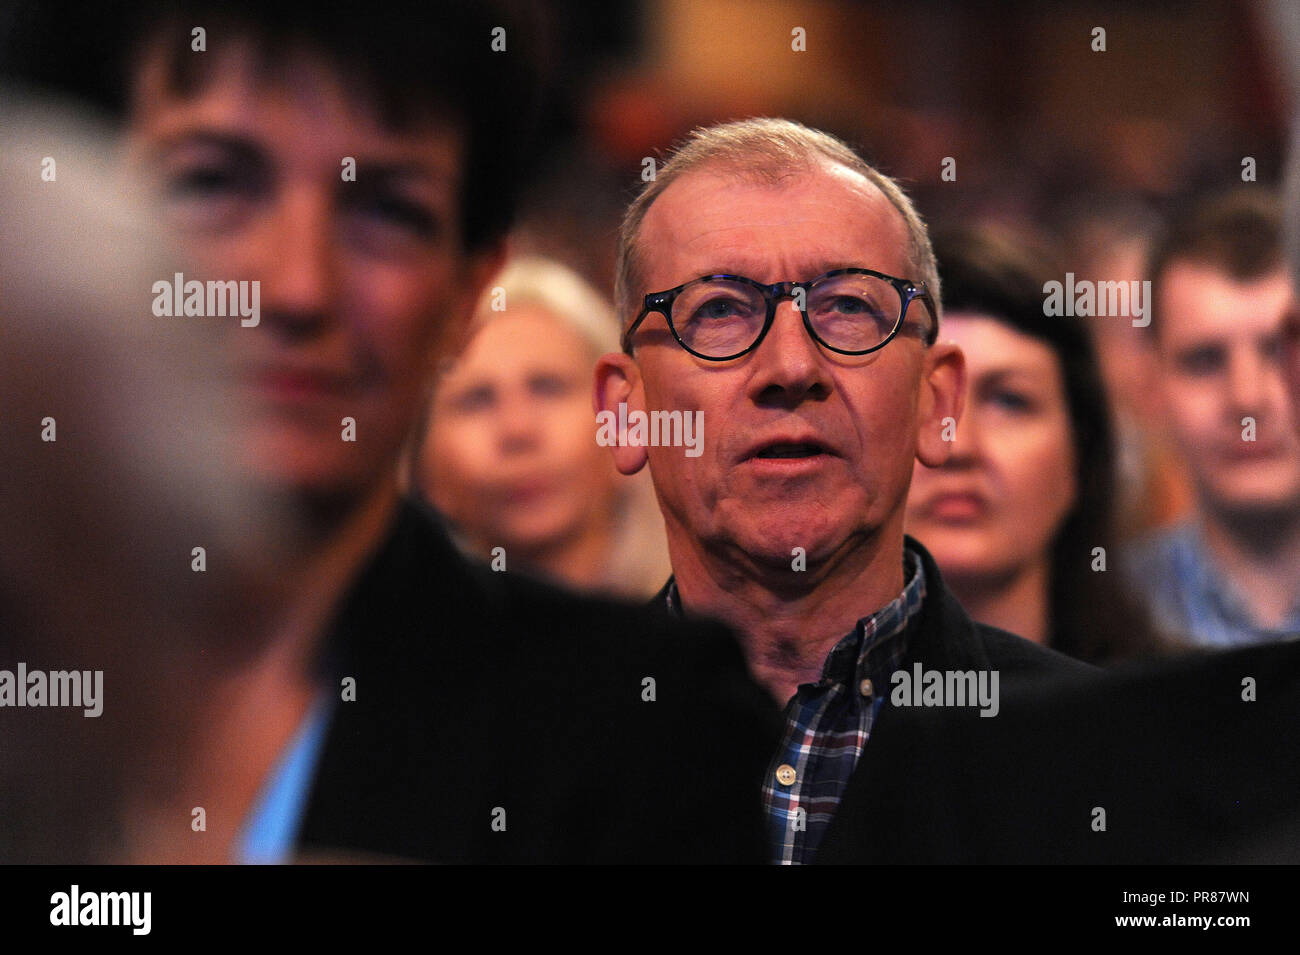 Birmingham, UK. 30th September, 2018.  Philip May, husband of Theresa May MP, Prime Minister and Leader of the Conservative Party, listening to opening speeches to conference on the first session of the first day of the Conservative Party annual conference at the ICC.  Kevin Hayes/Alamy Live News Stock Photo